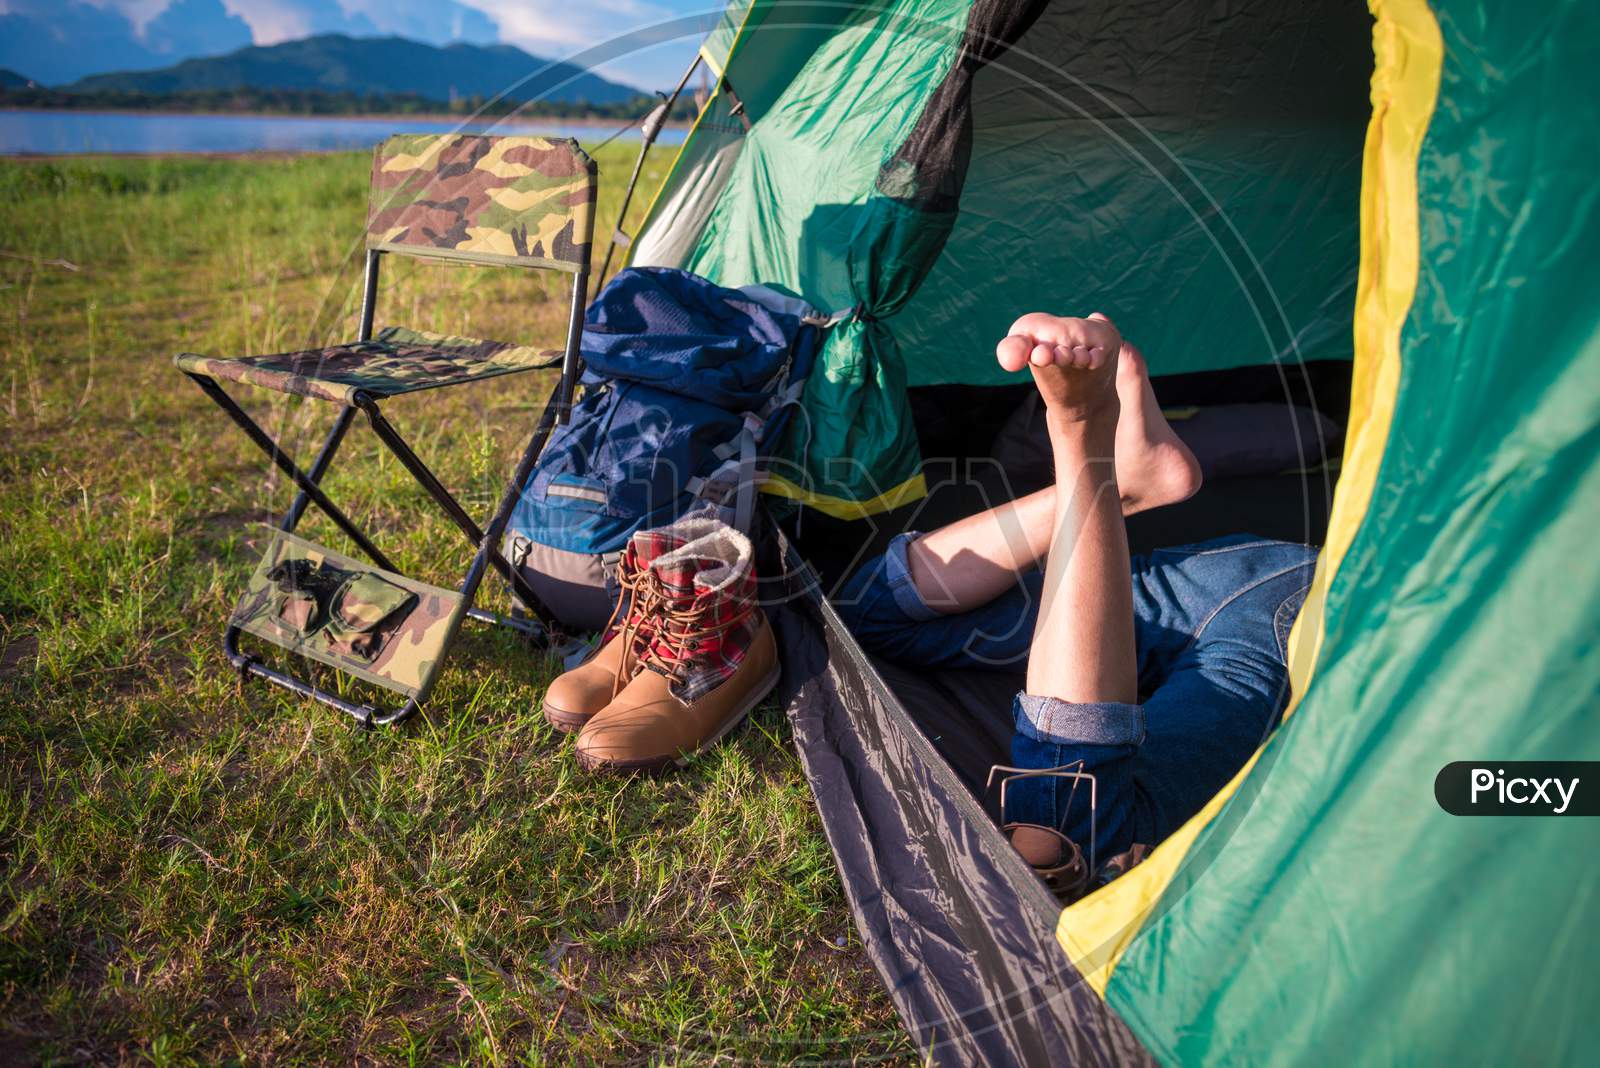 Close Up Of Woman Legs Relaxing In Camping Tent With Mountain Lake And Meadow And Grass Field Background. Lifestyles And People Concept. Camping And Picnec Theme. Green Natural And Summer Travel Theme